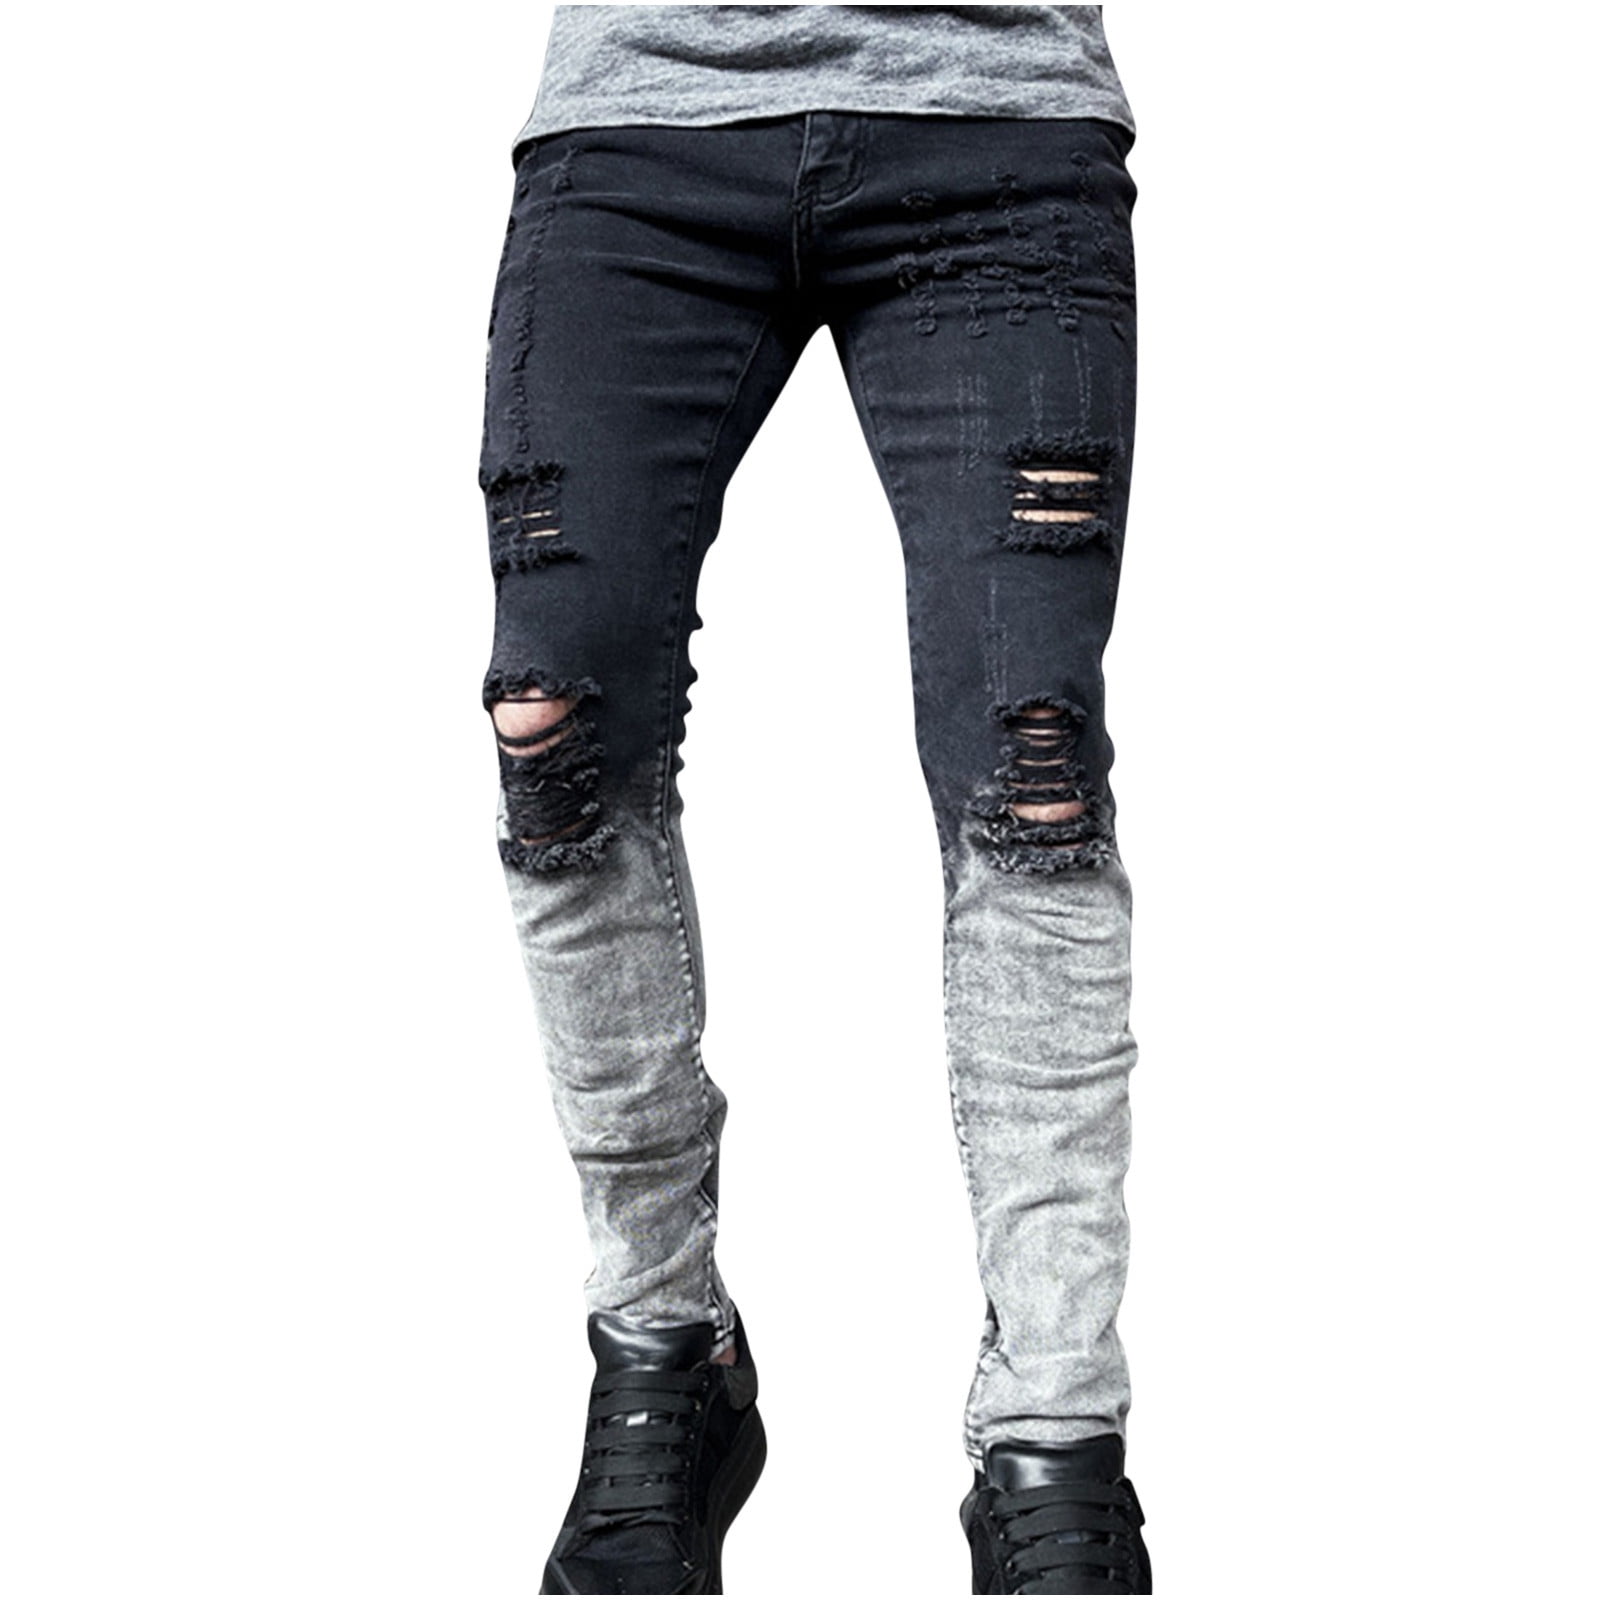 Jeans- Men's Ripped Jeans, Torn Jeans online at Powerlook